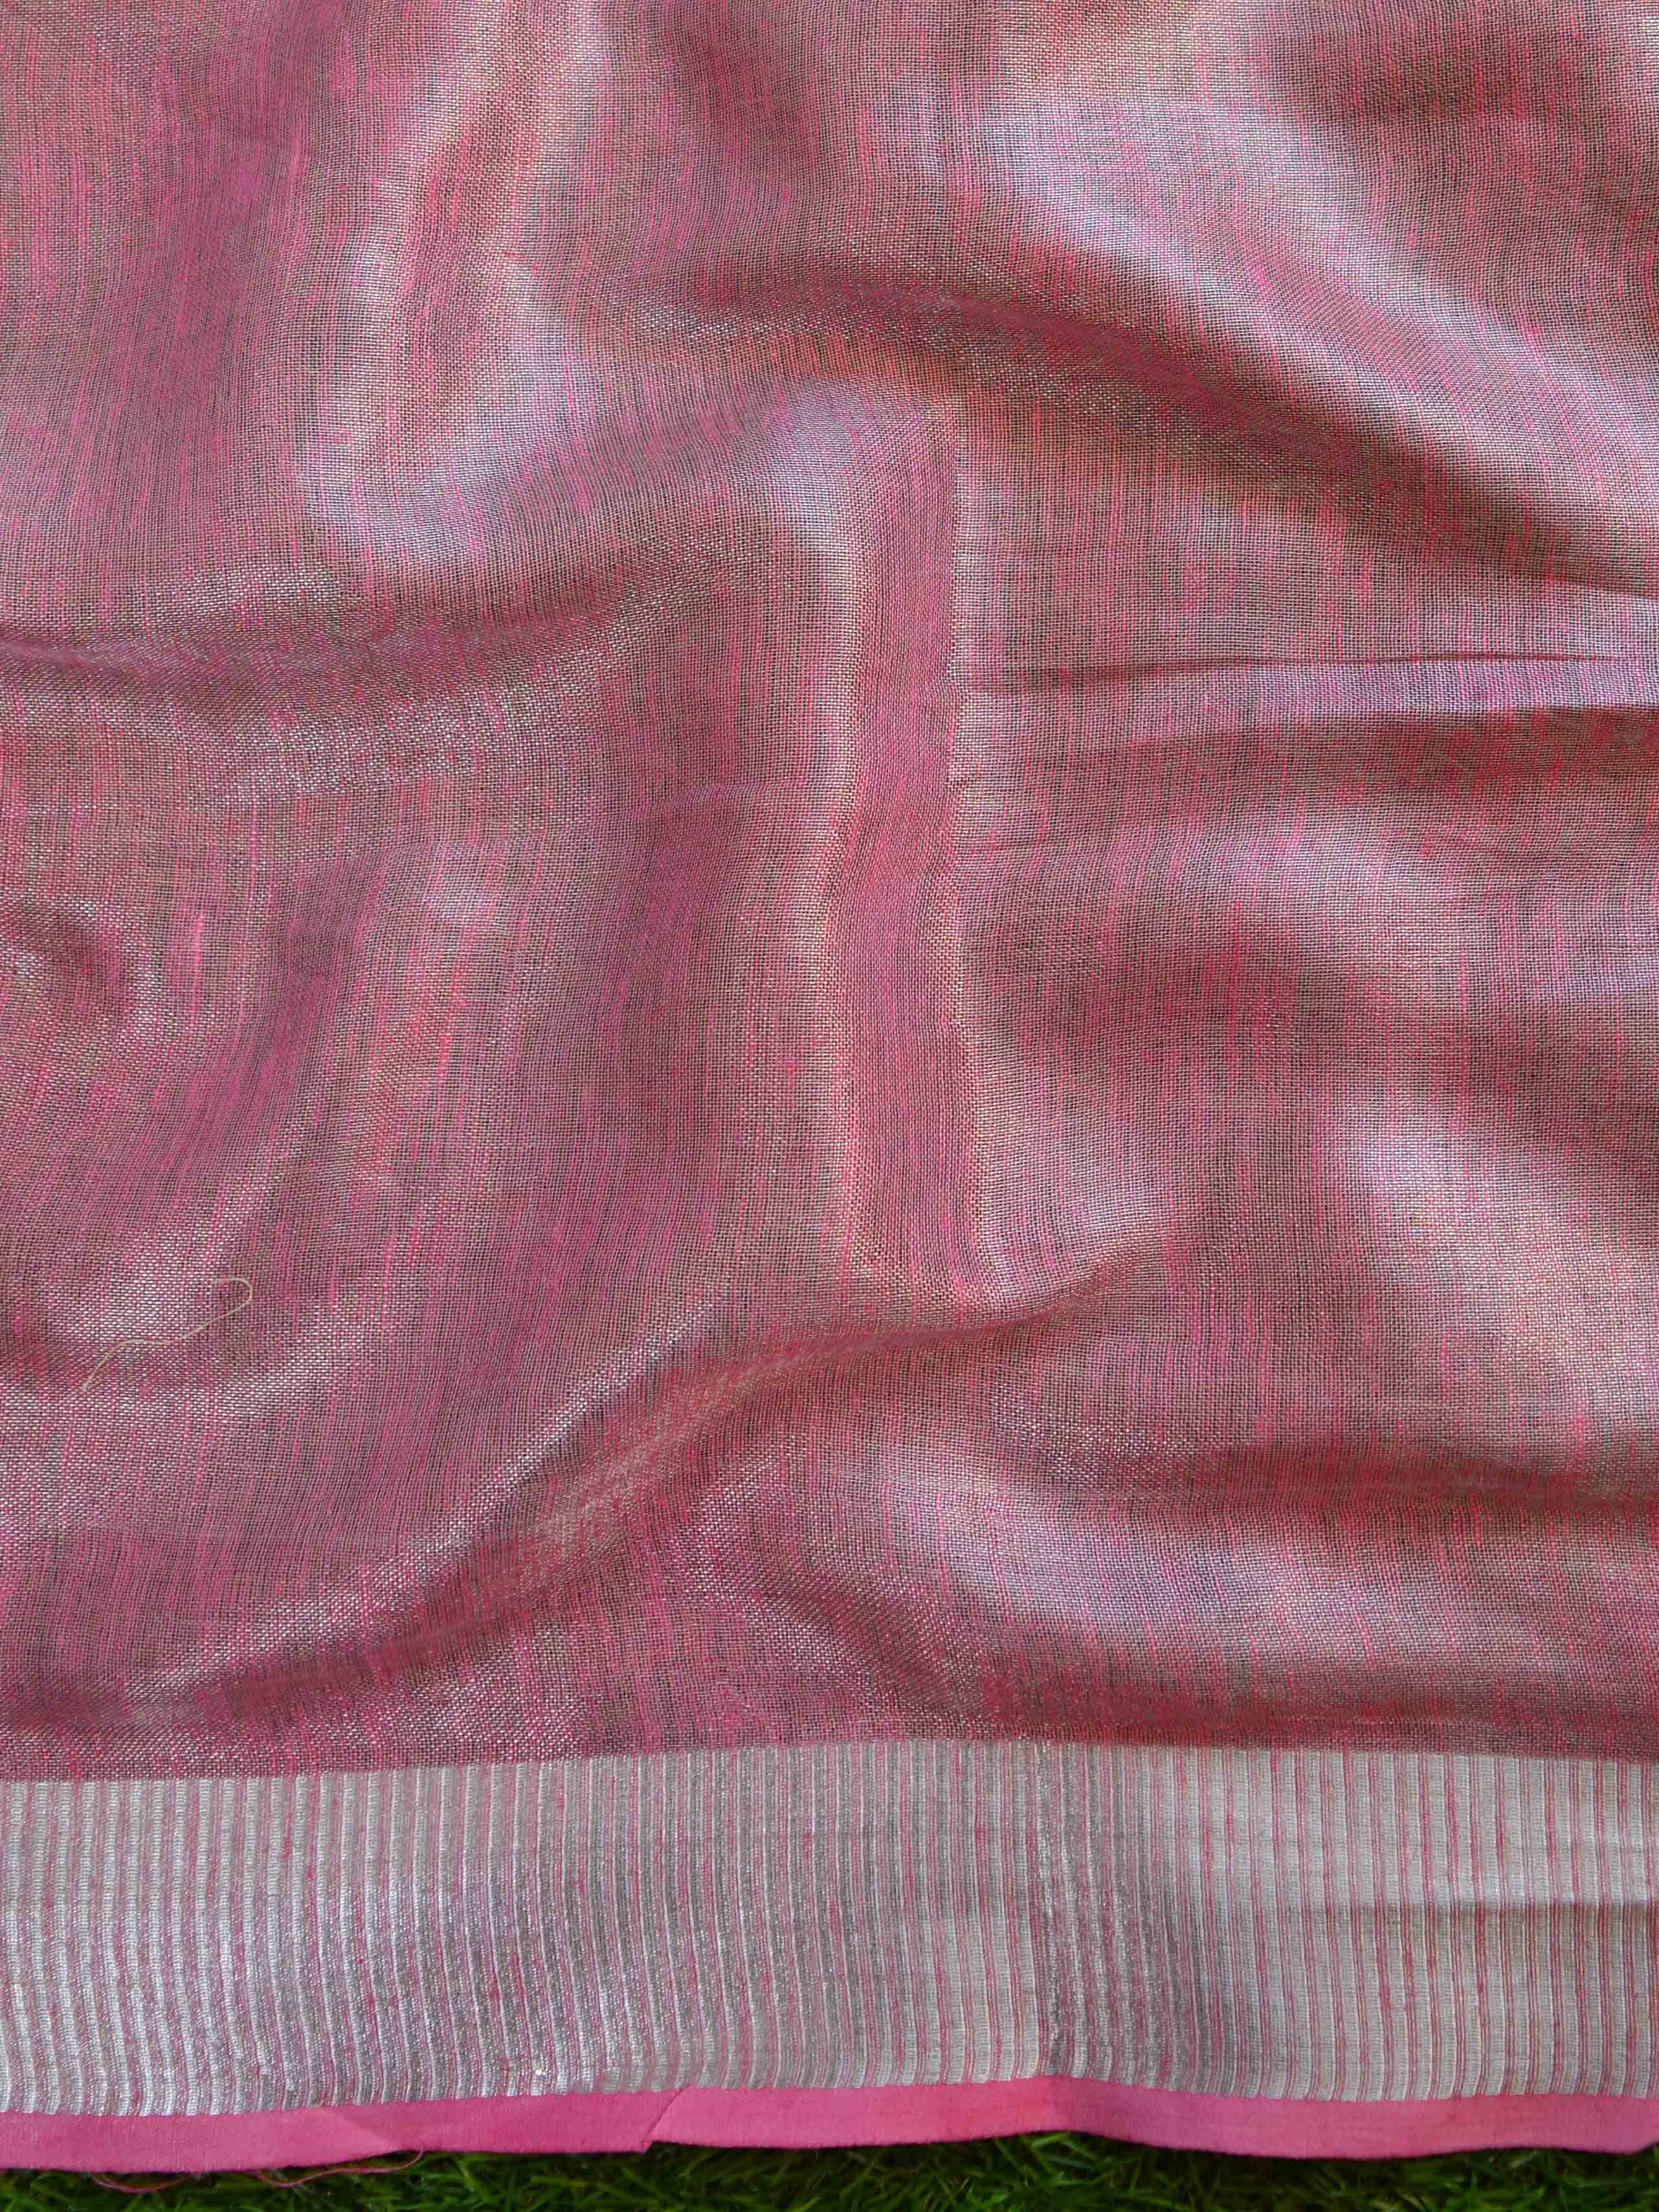 Banarasee Handloom Pure Linen By Tissue Embroidered Saree-Silver & Pink